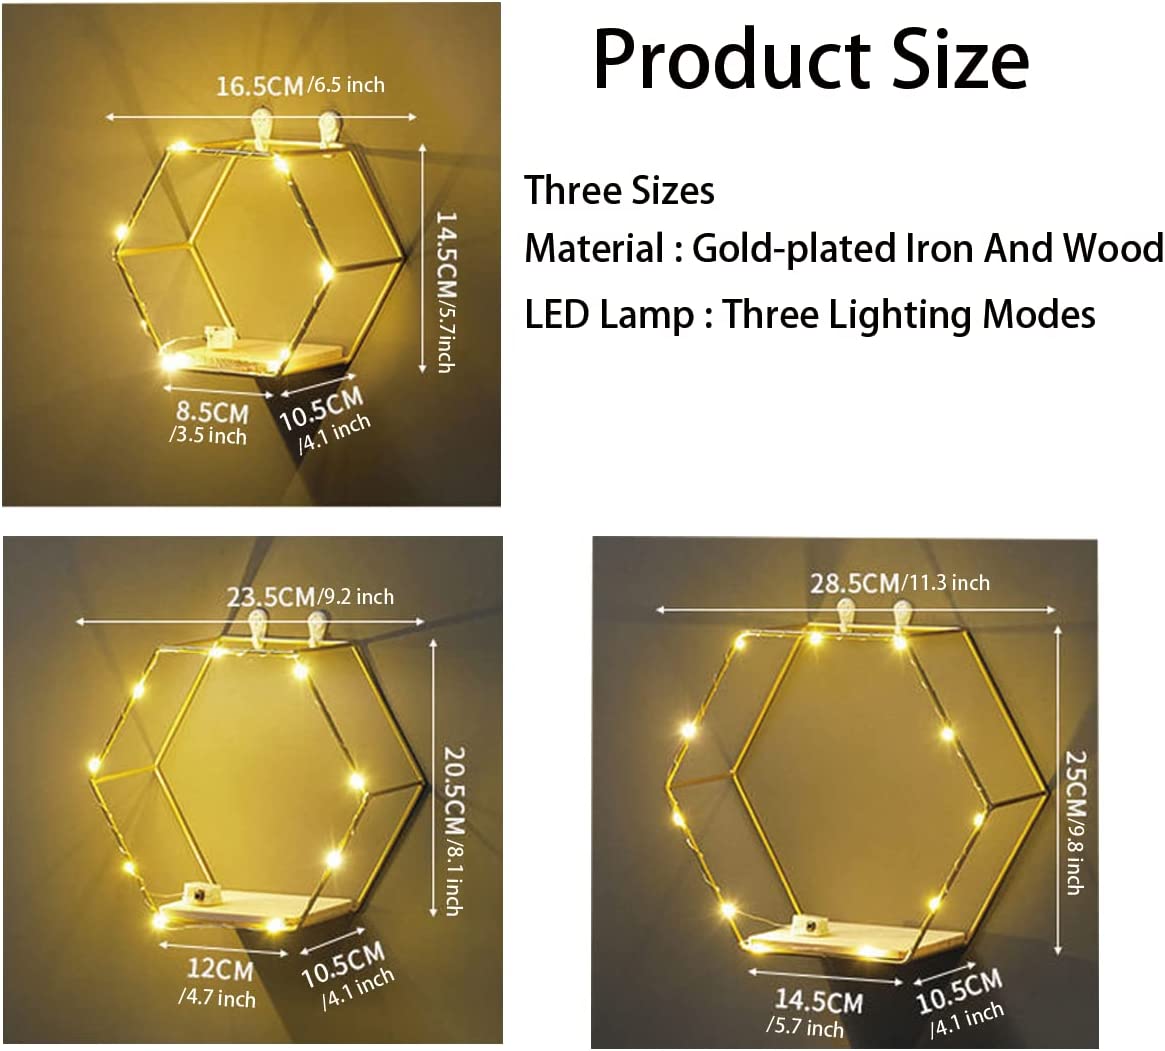 Hexagon Floating Shelves Wall Decor, Gold Metal Wire and Wood Wall Mounted Storage Shelf Home Decorations Art for Bedroom Living Room Kitchen Bathroom, Set of 3 with LED Lights